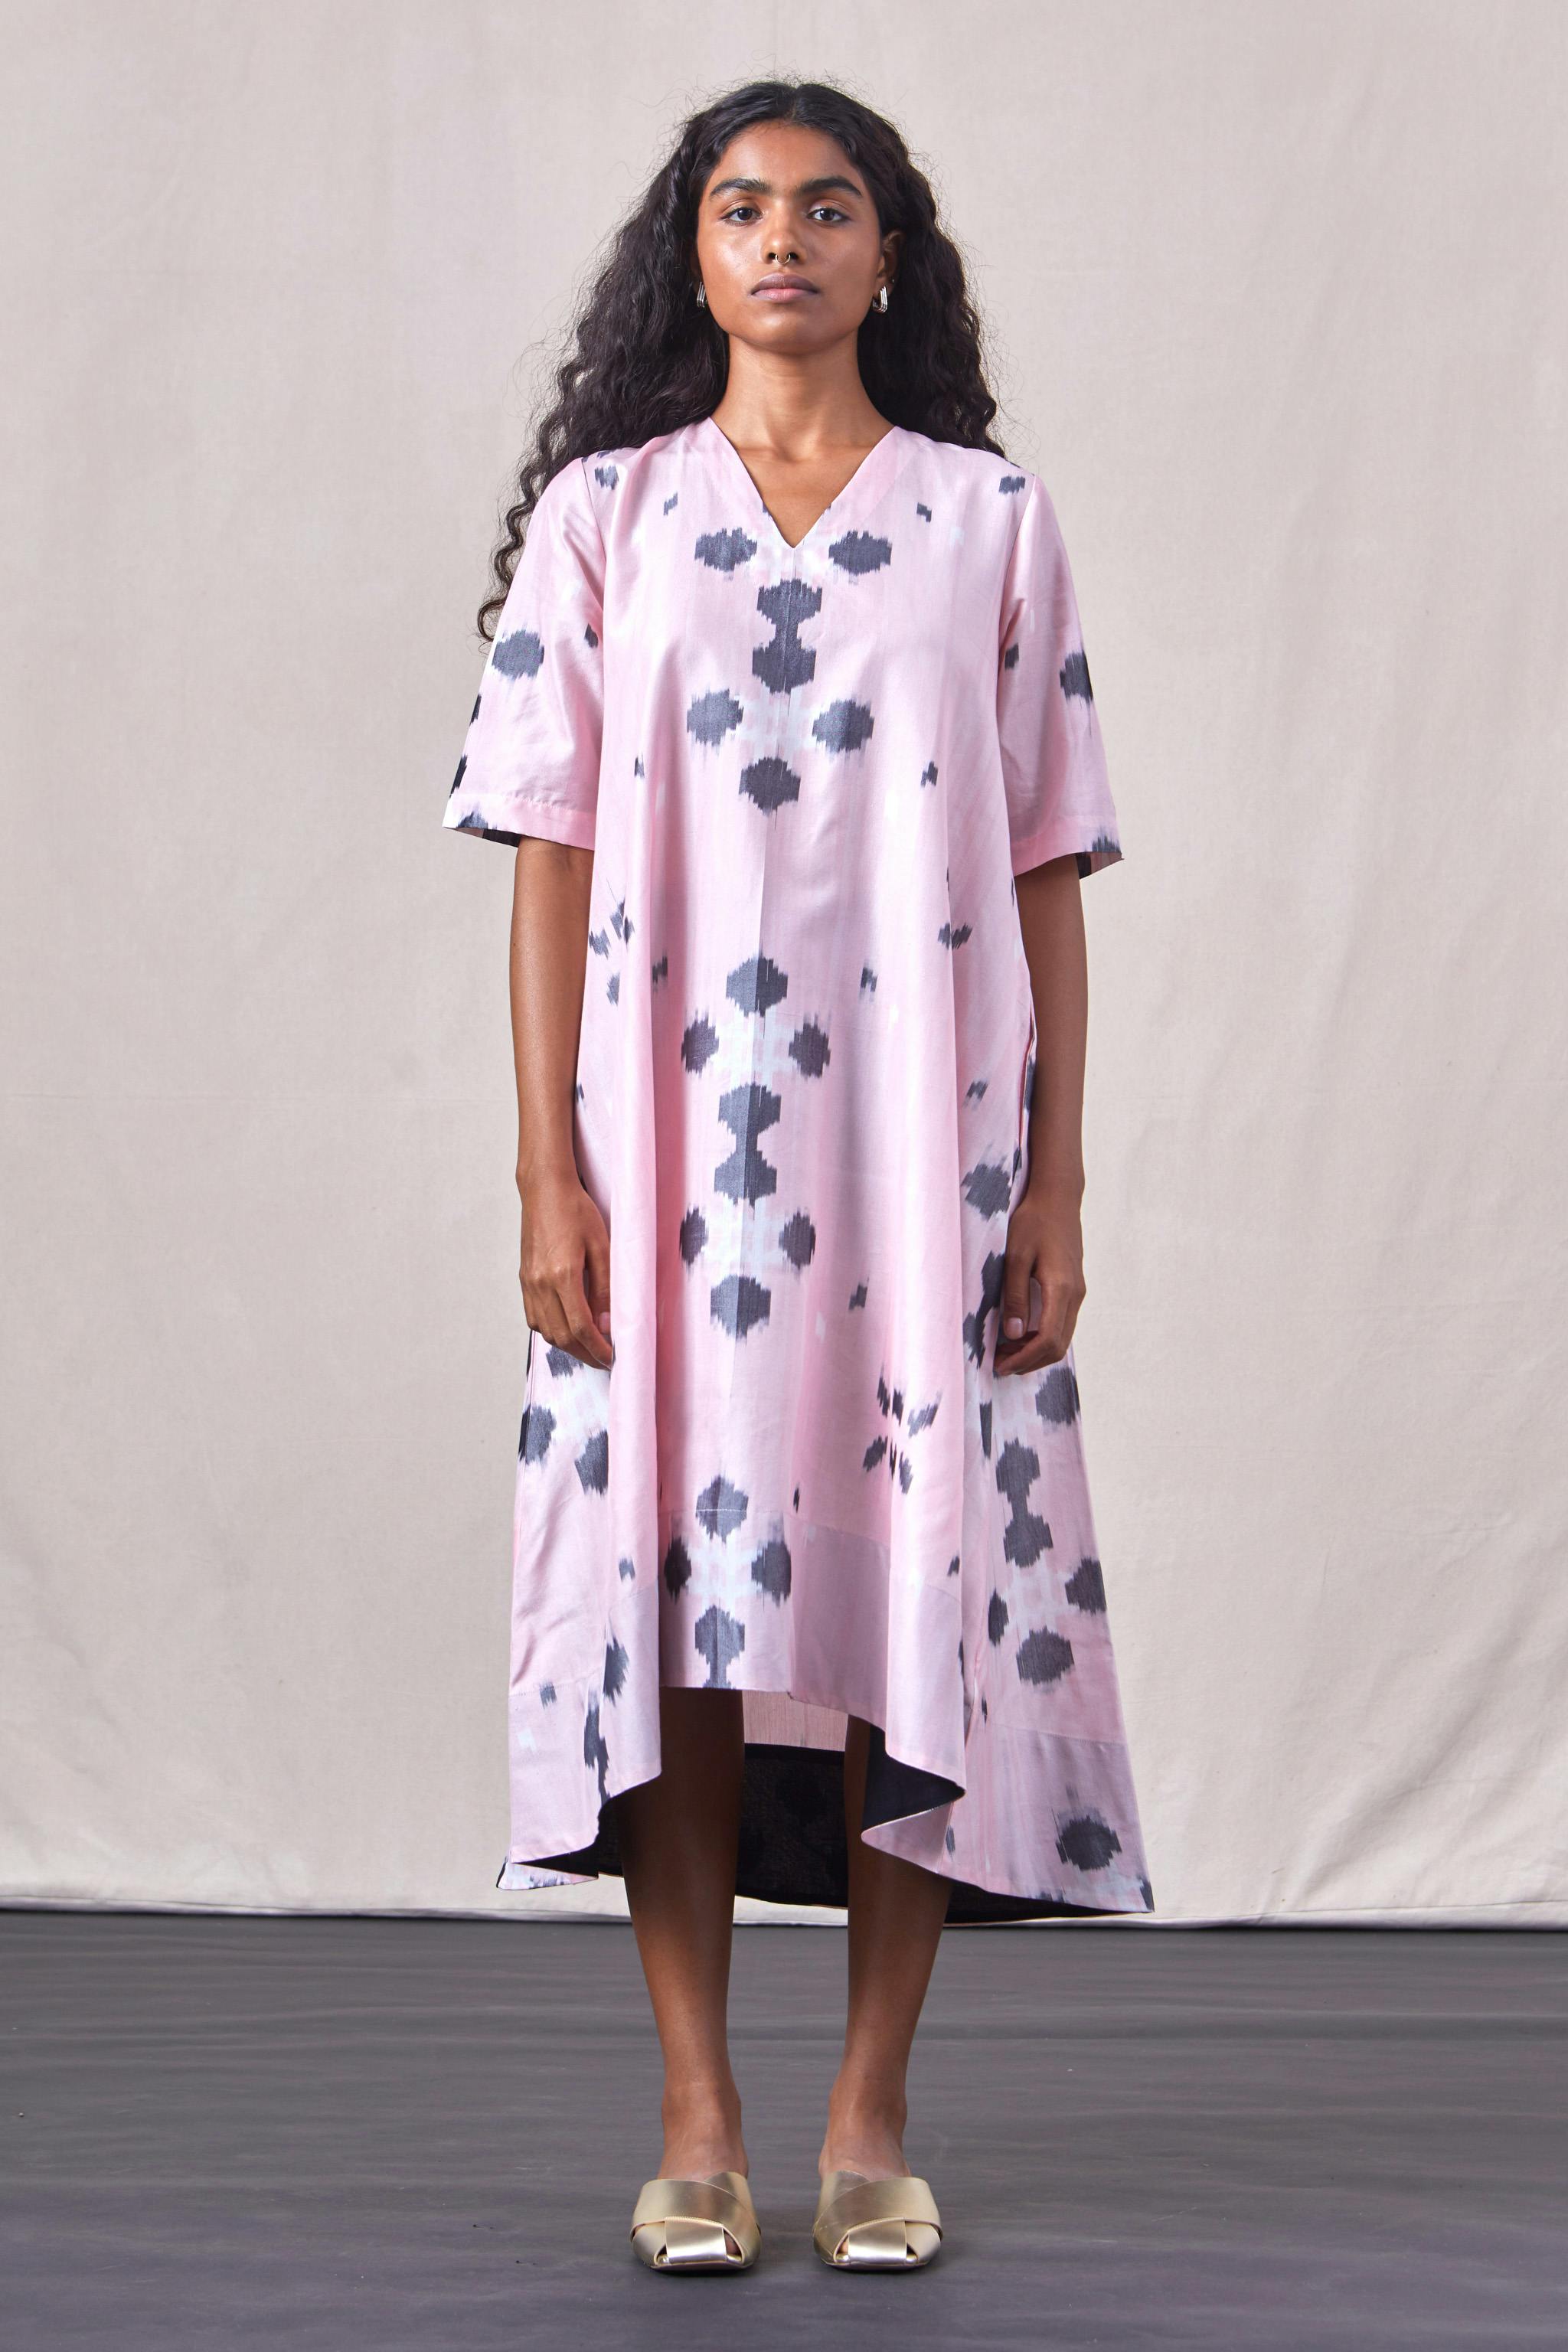 Parer - Ikat Dress Pink, a product by The Summer House